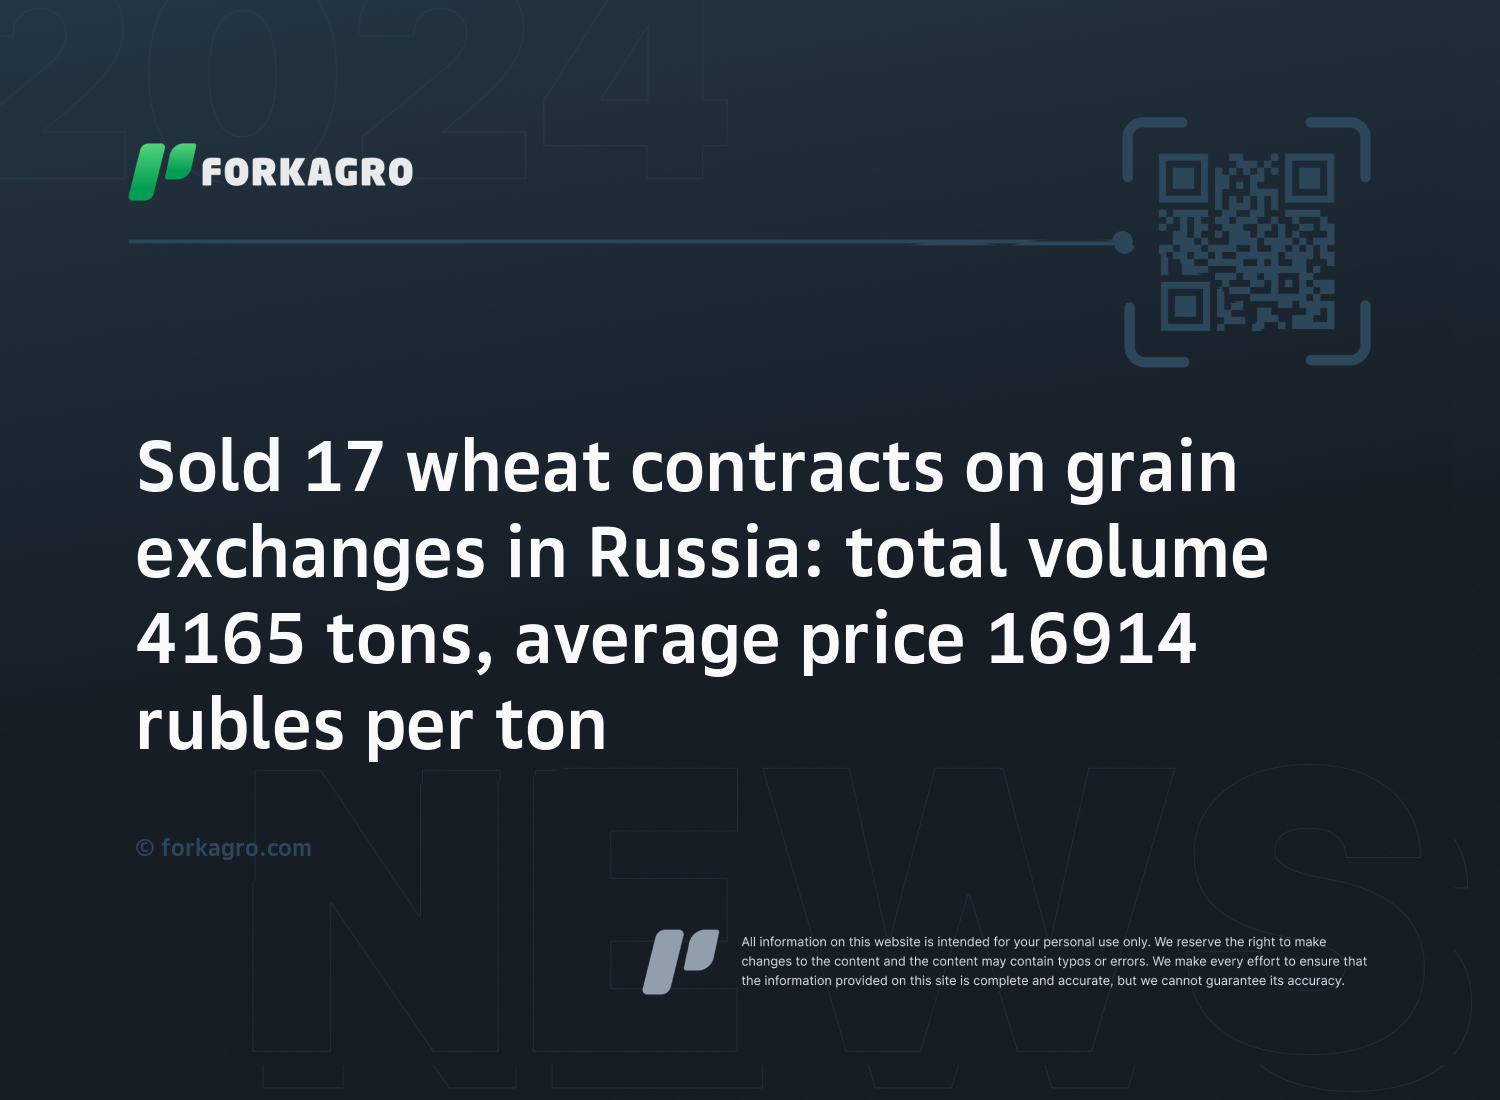 Sold 17 wheat contracts on grain exchanges in Russia: total volume 4165 tons, average price 16914 rubles per ton